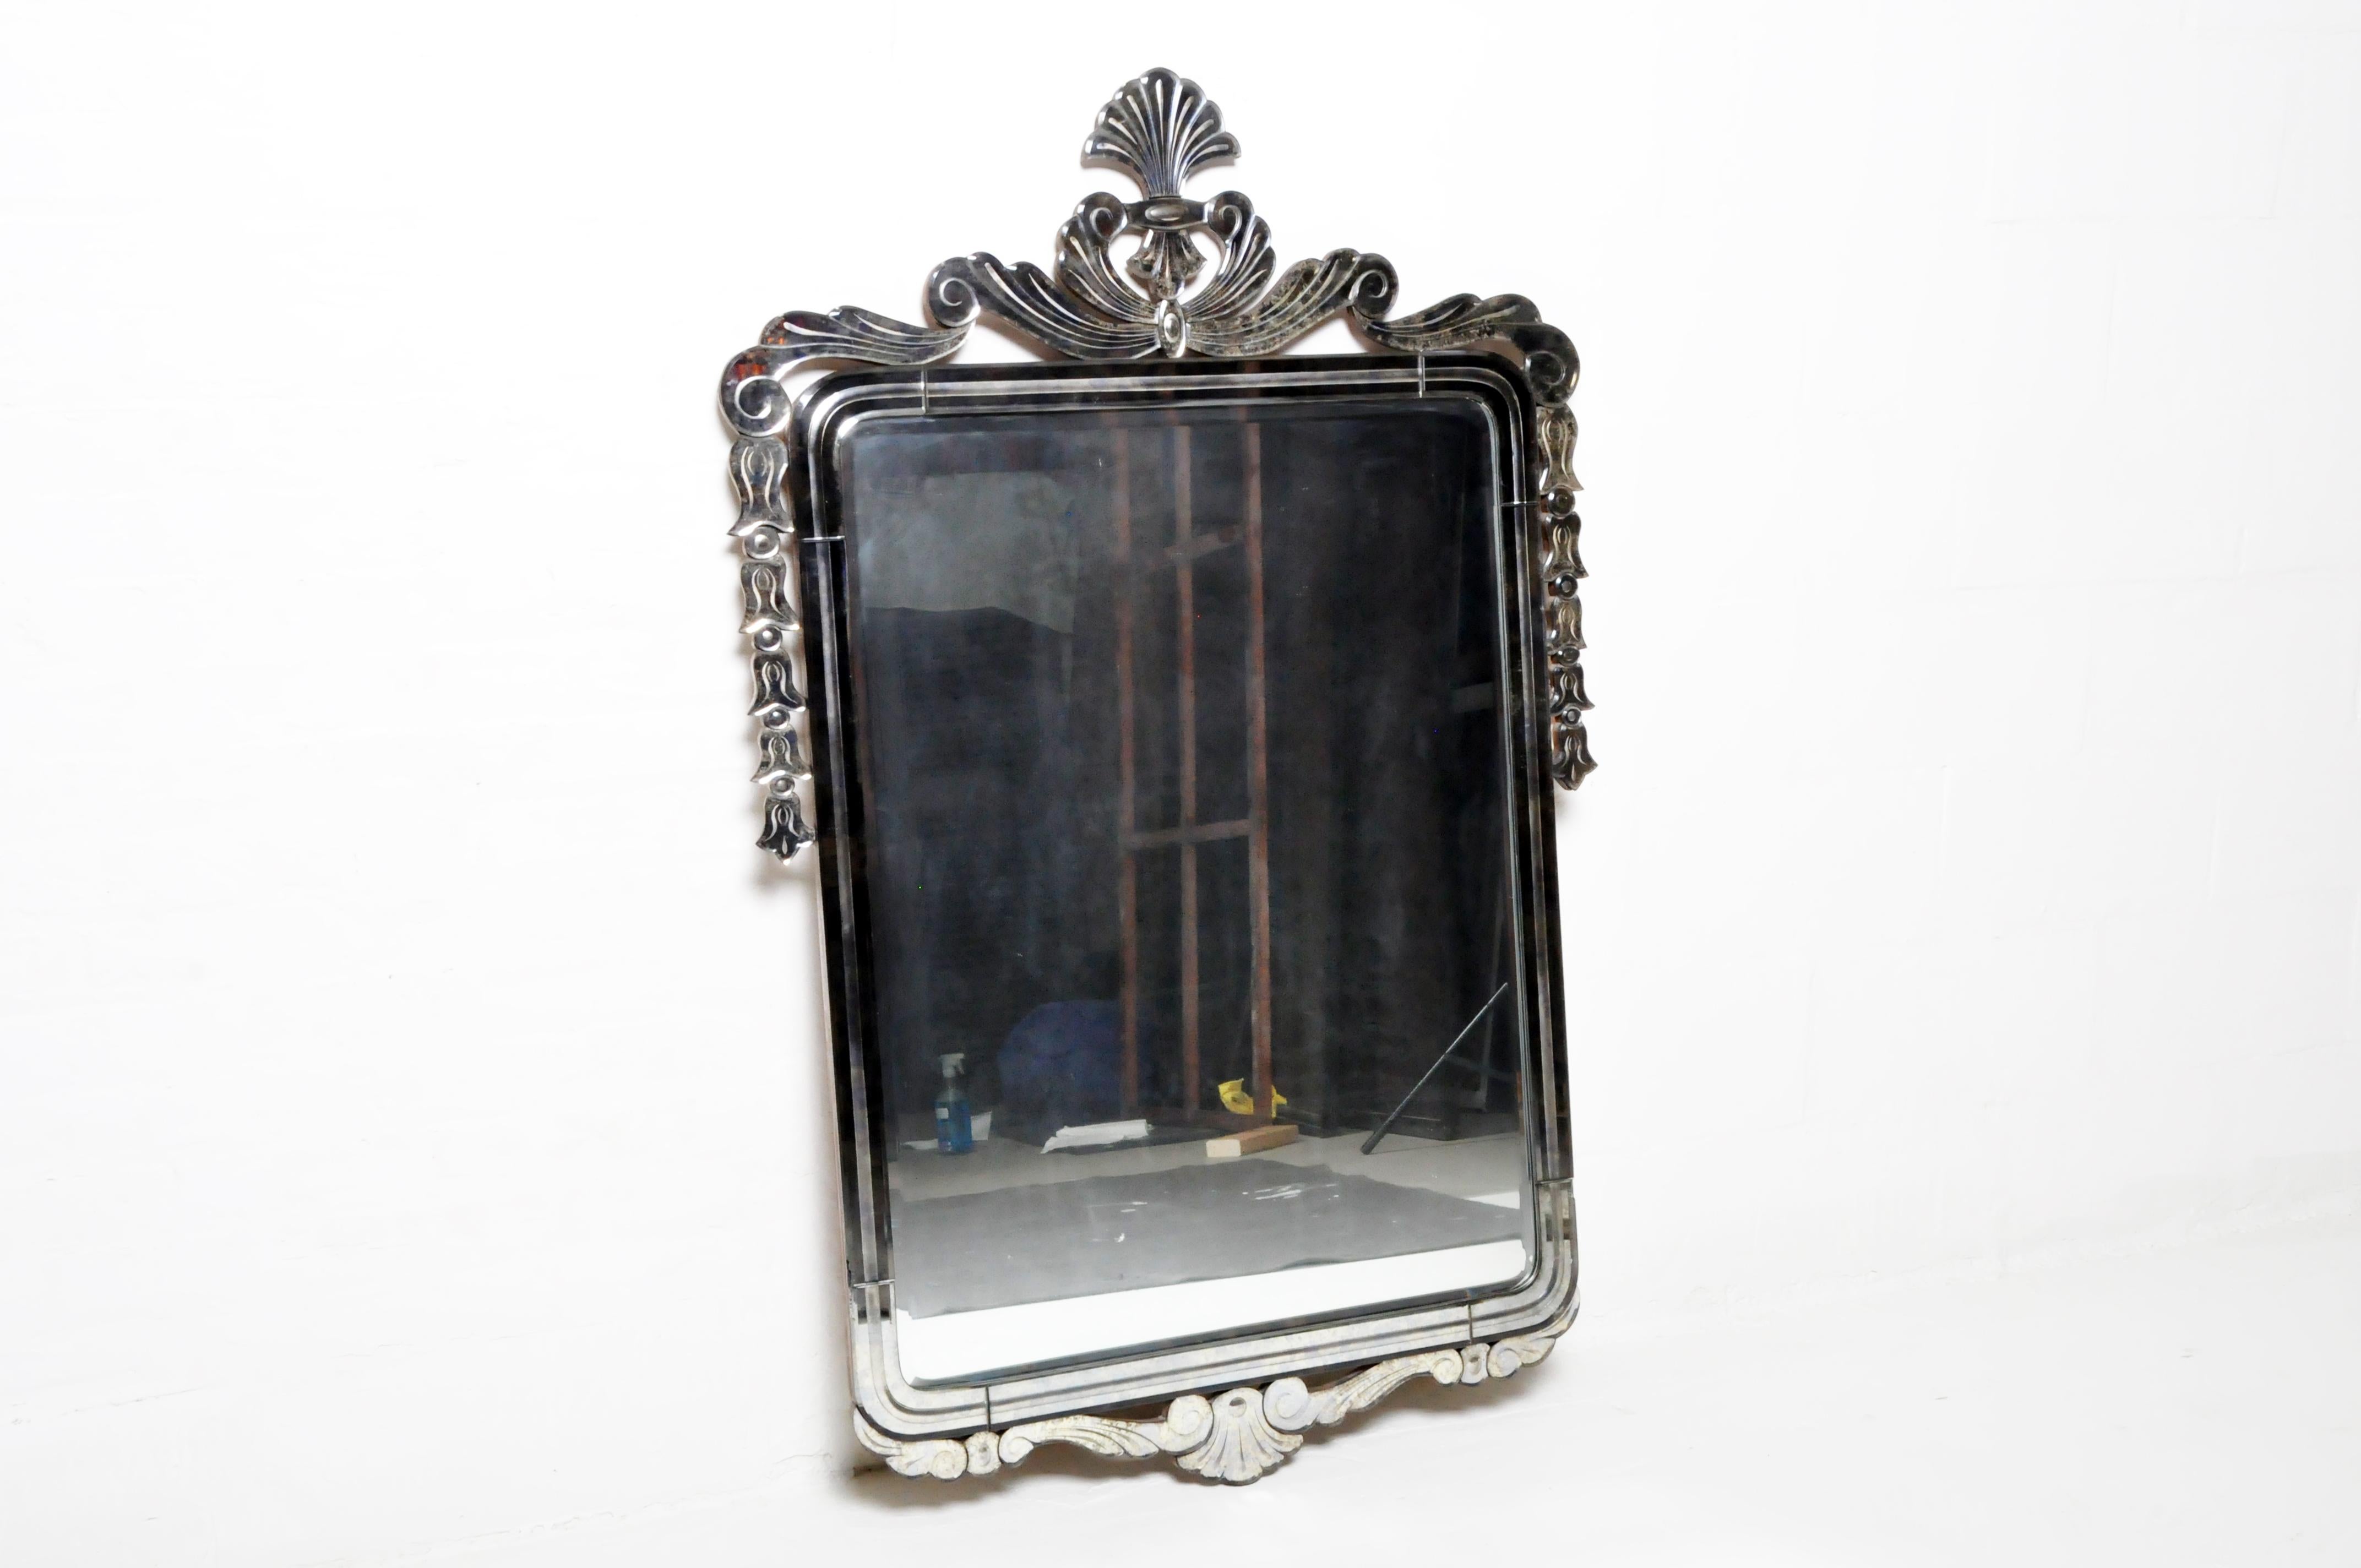 This Venetian style mirror is from Italy and was made from glass and metal, c. 20th century. This Venetian mirror is made form cut glass shards arranged in a simple and elegant Art Deco design. The frame is solid wood. The piece is contemporary and